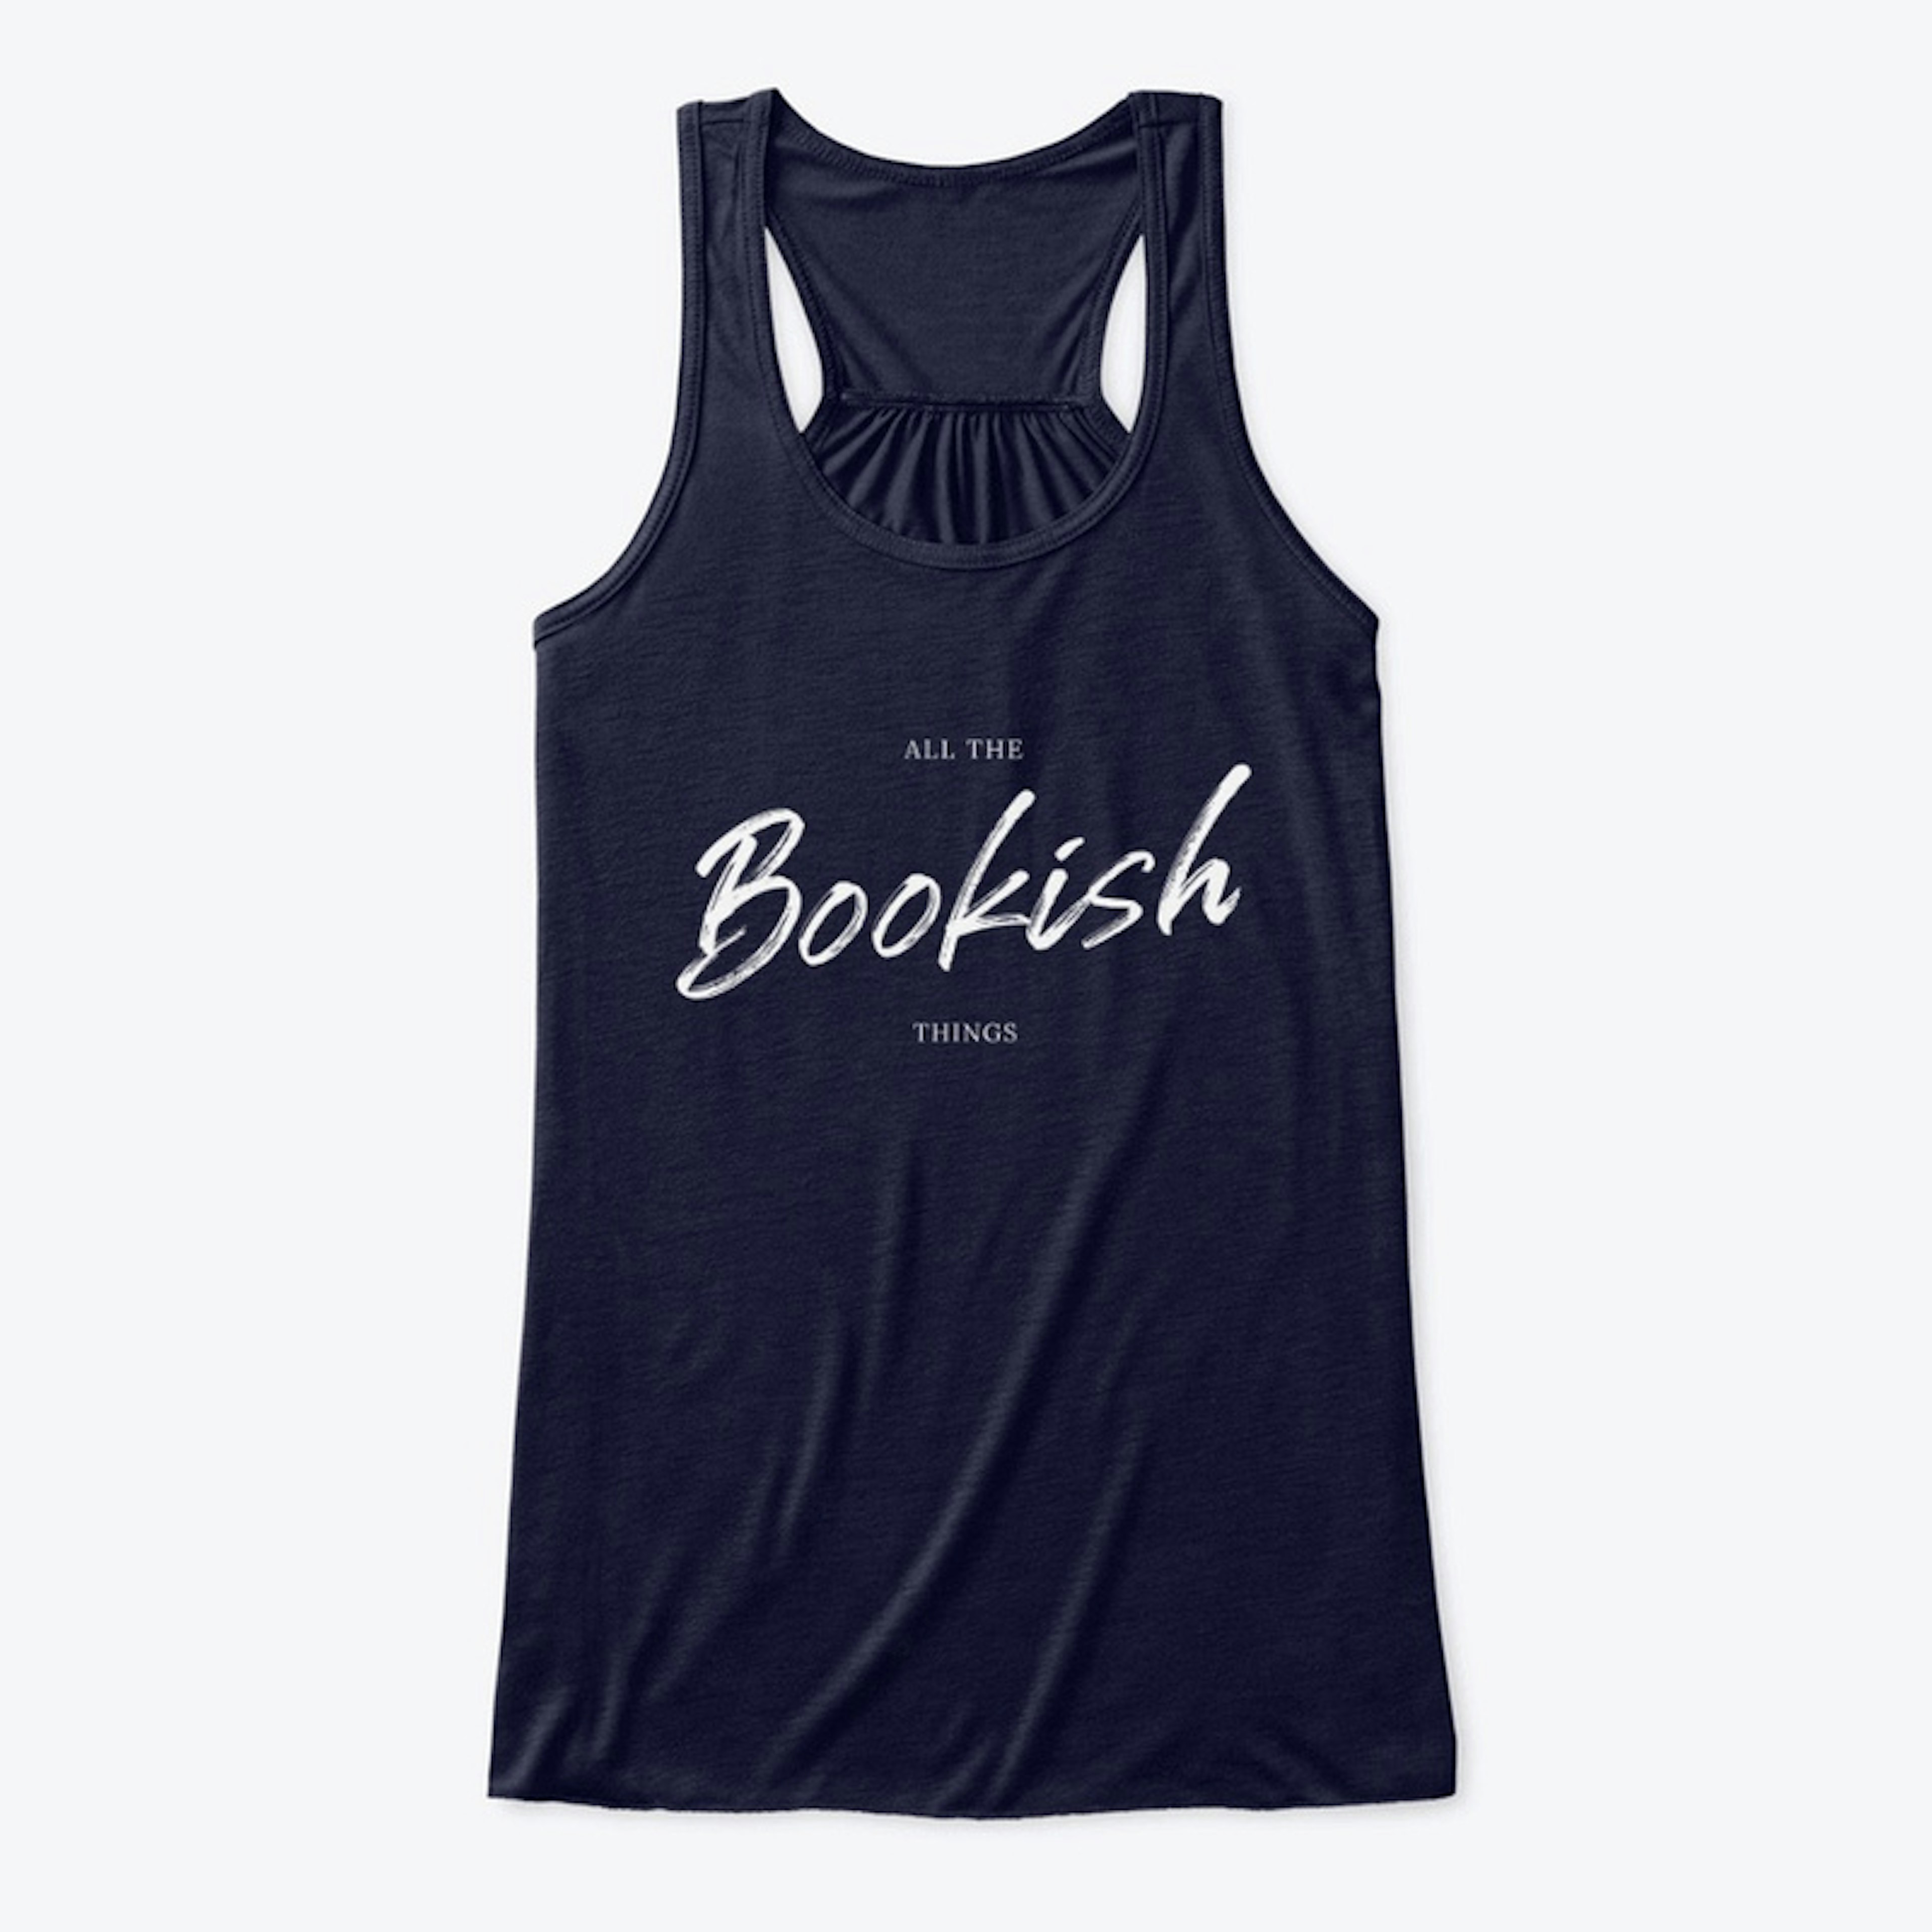 All the Bookish Things